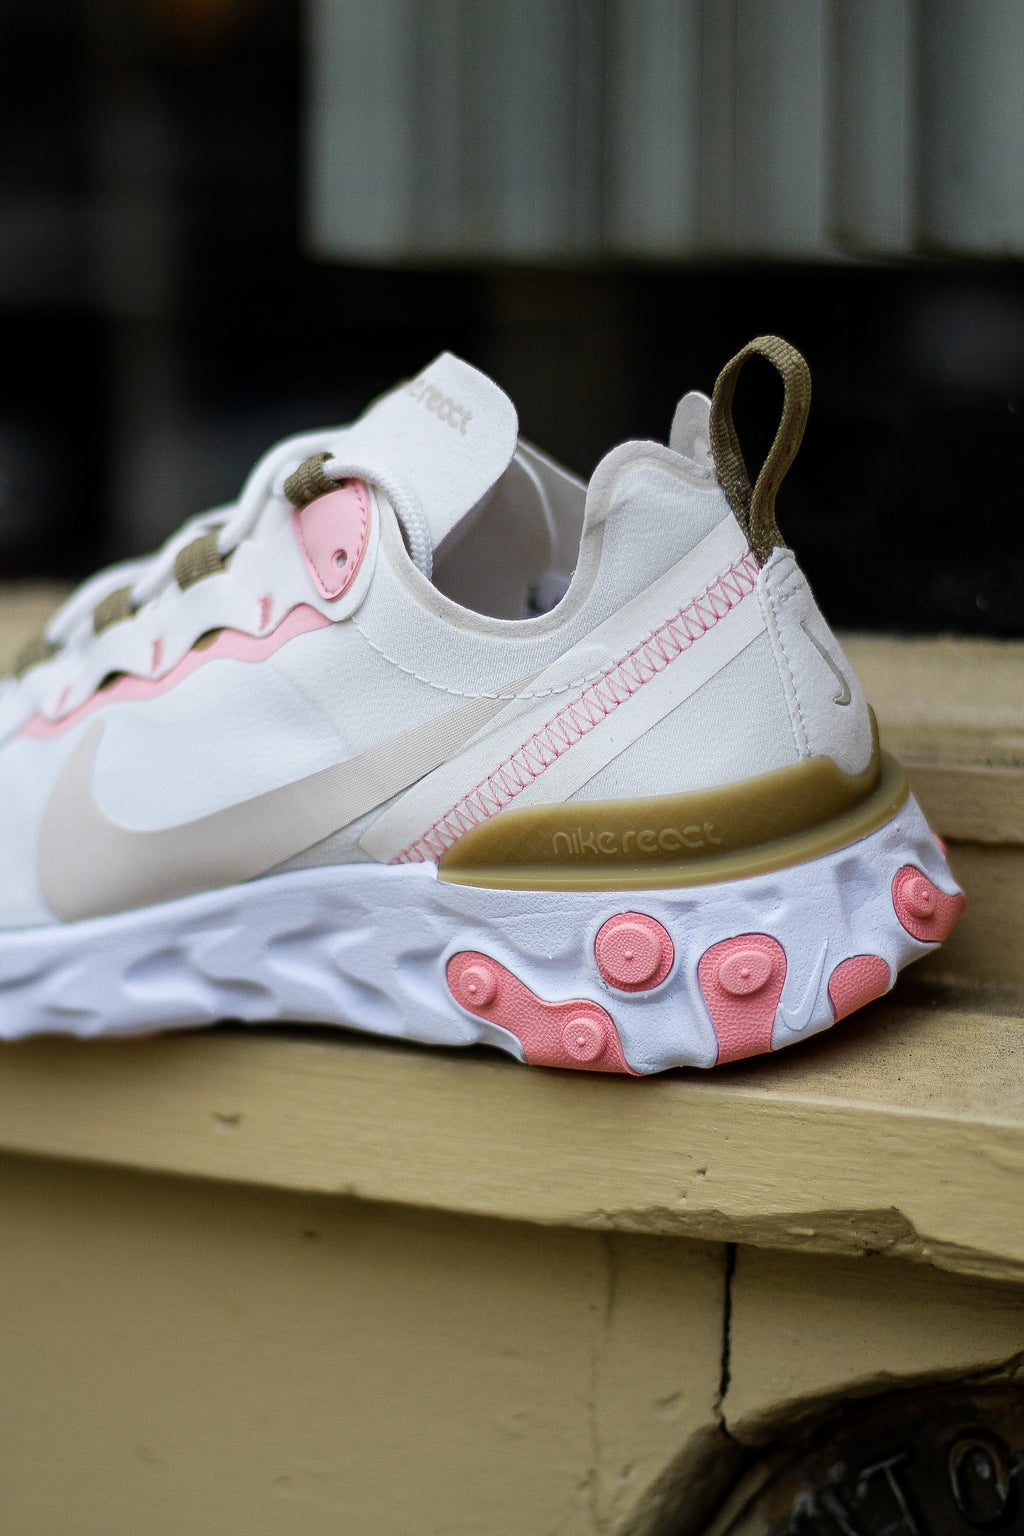 Nike React Element 55 sneakers in white and pink